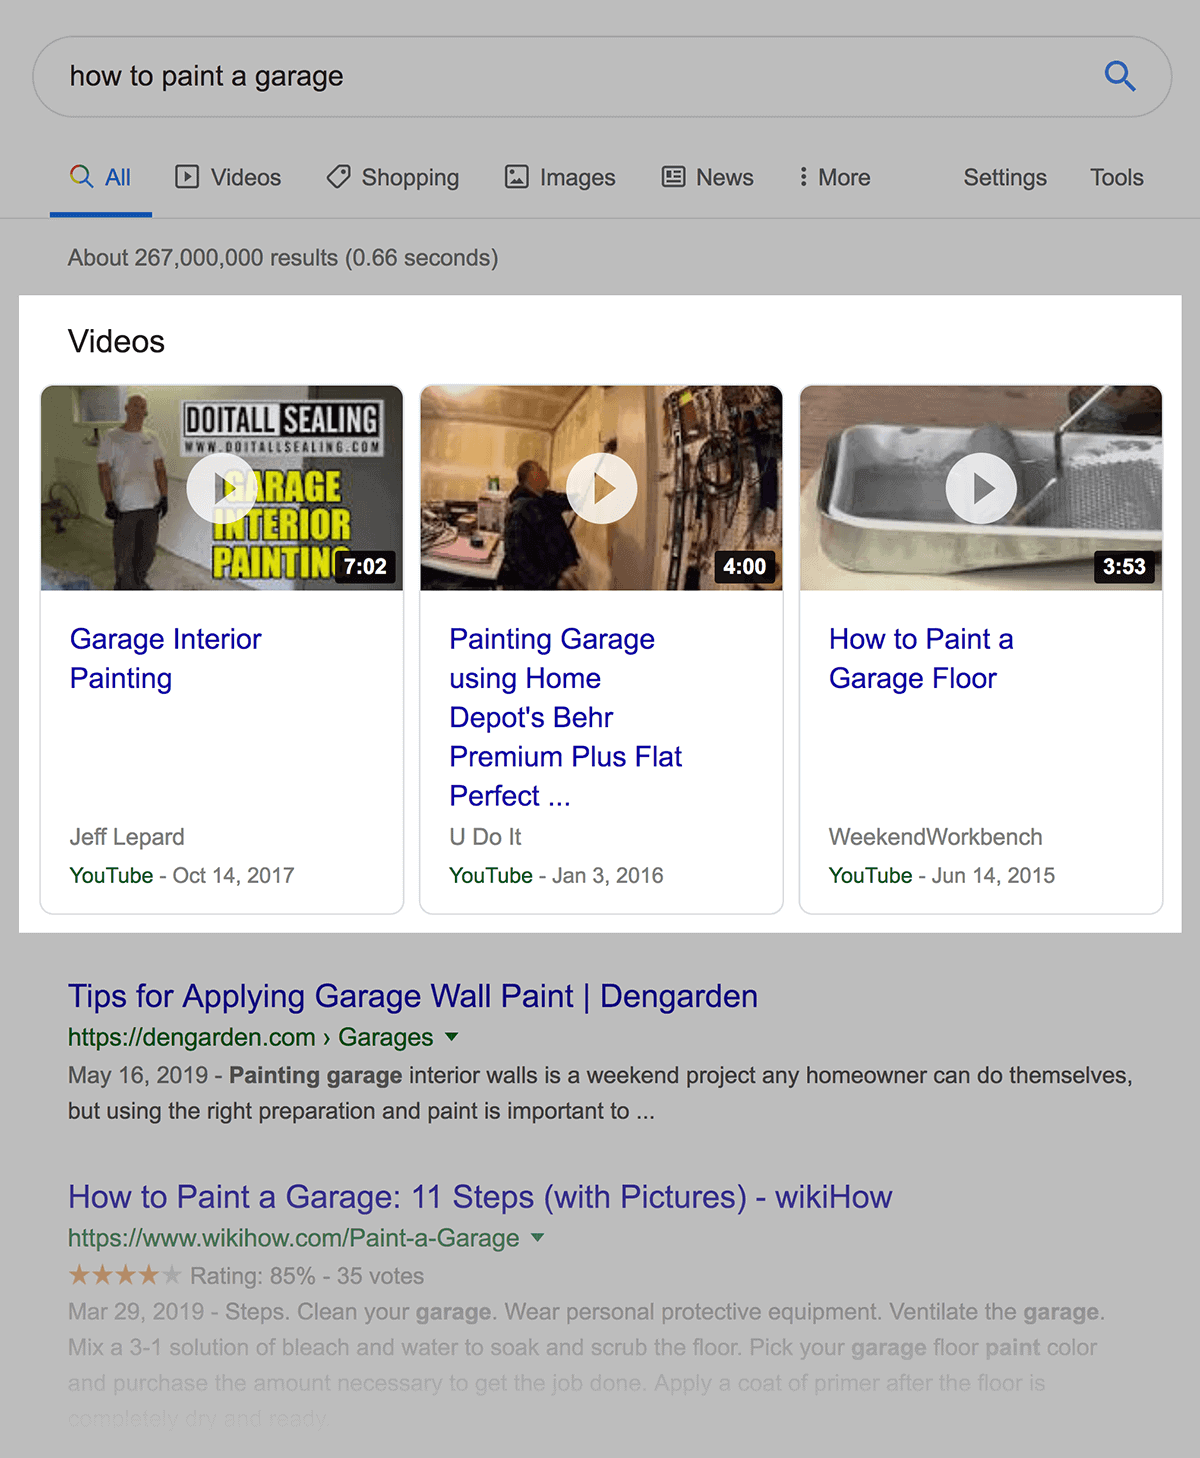 Video results for "how to paint a garage"